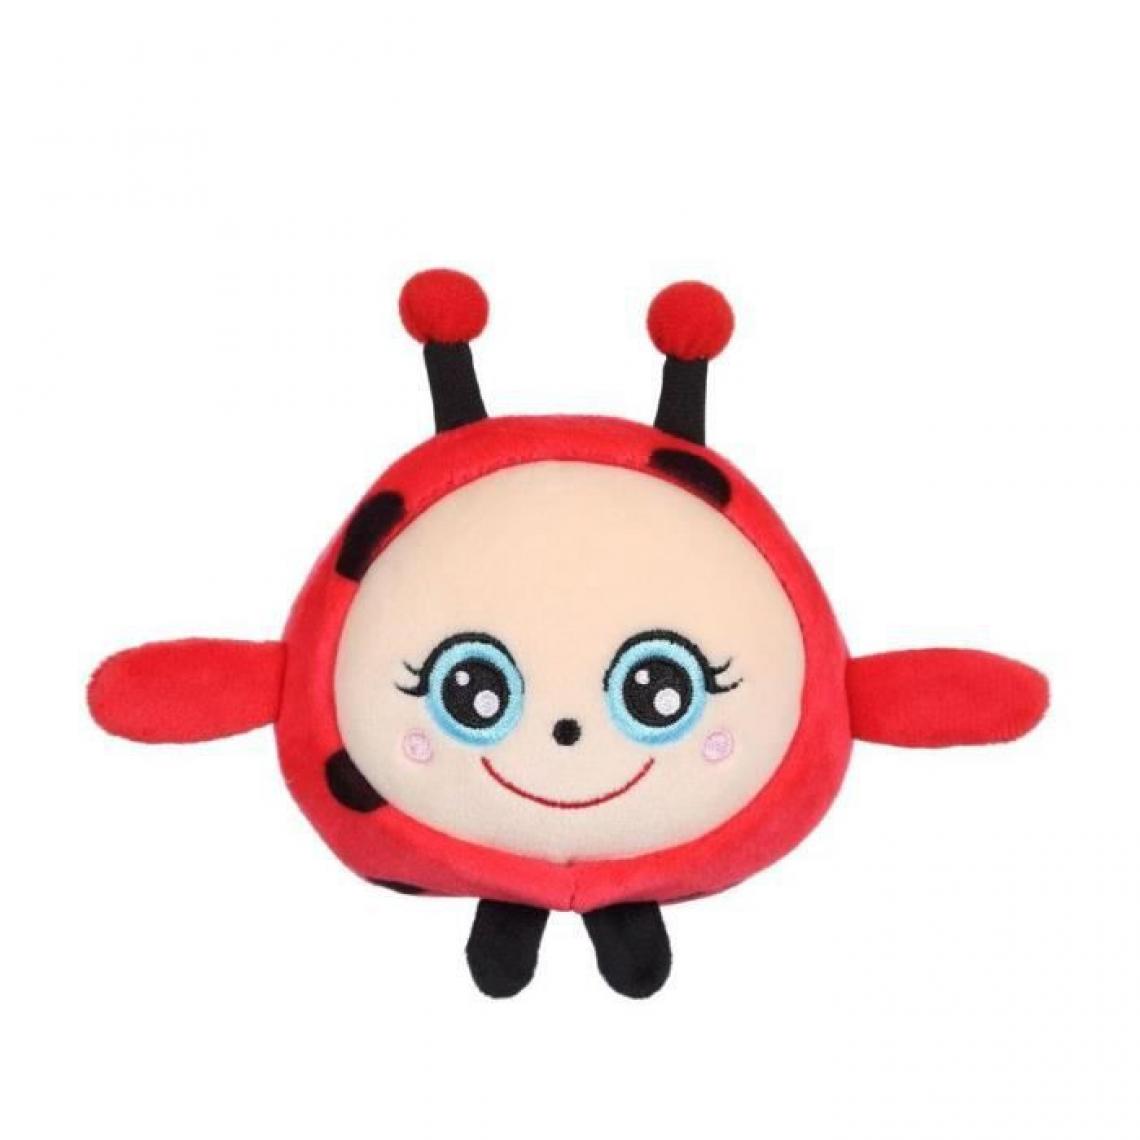 Gipsy - GIPSY TOYS Squishimals 10 cm coccinelle rouge Dotty - Ours en peluche